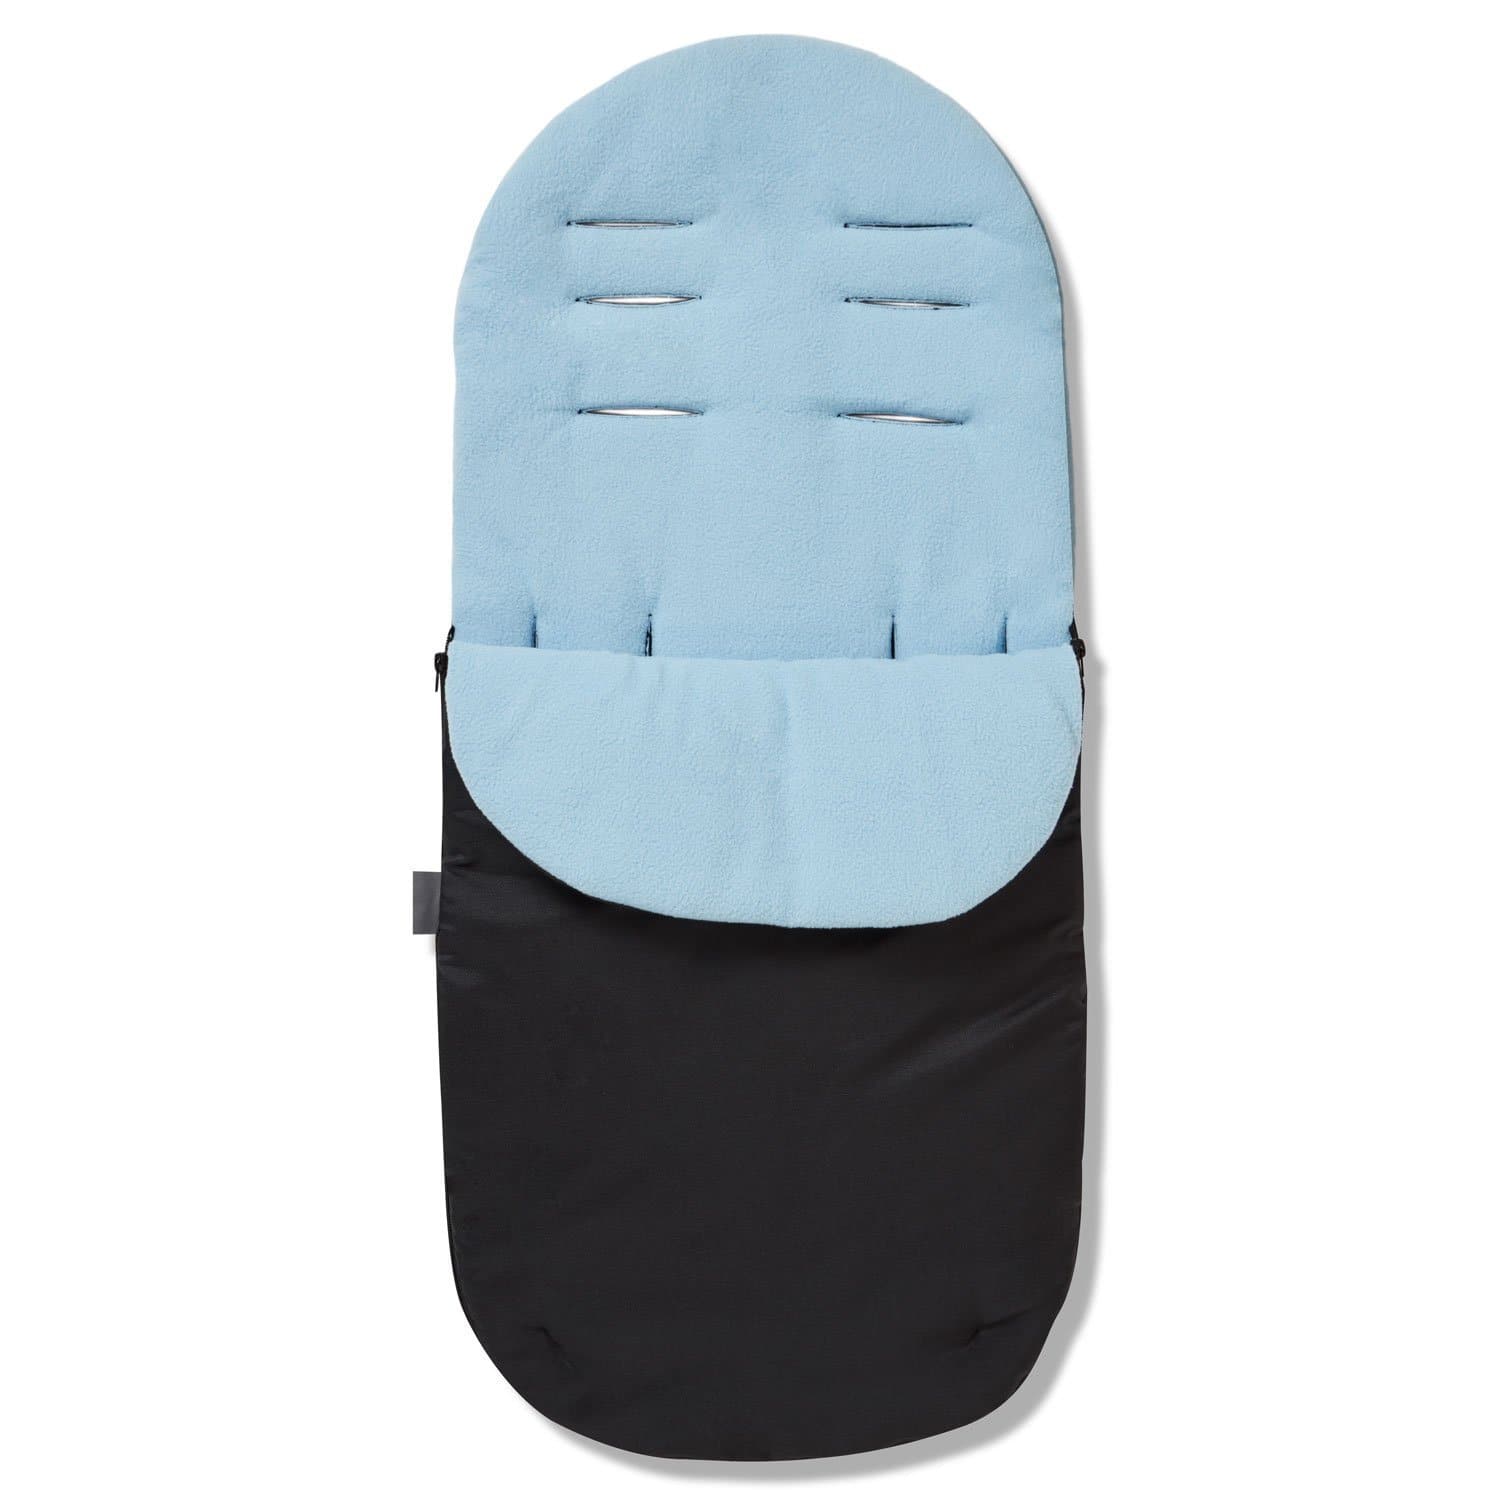 Footmuff / Cosy Toes Compatible with Zeta - Light Blue / Fits All Models | For Your Little One